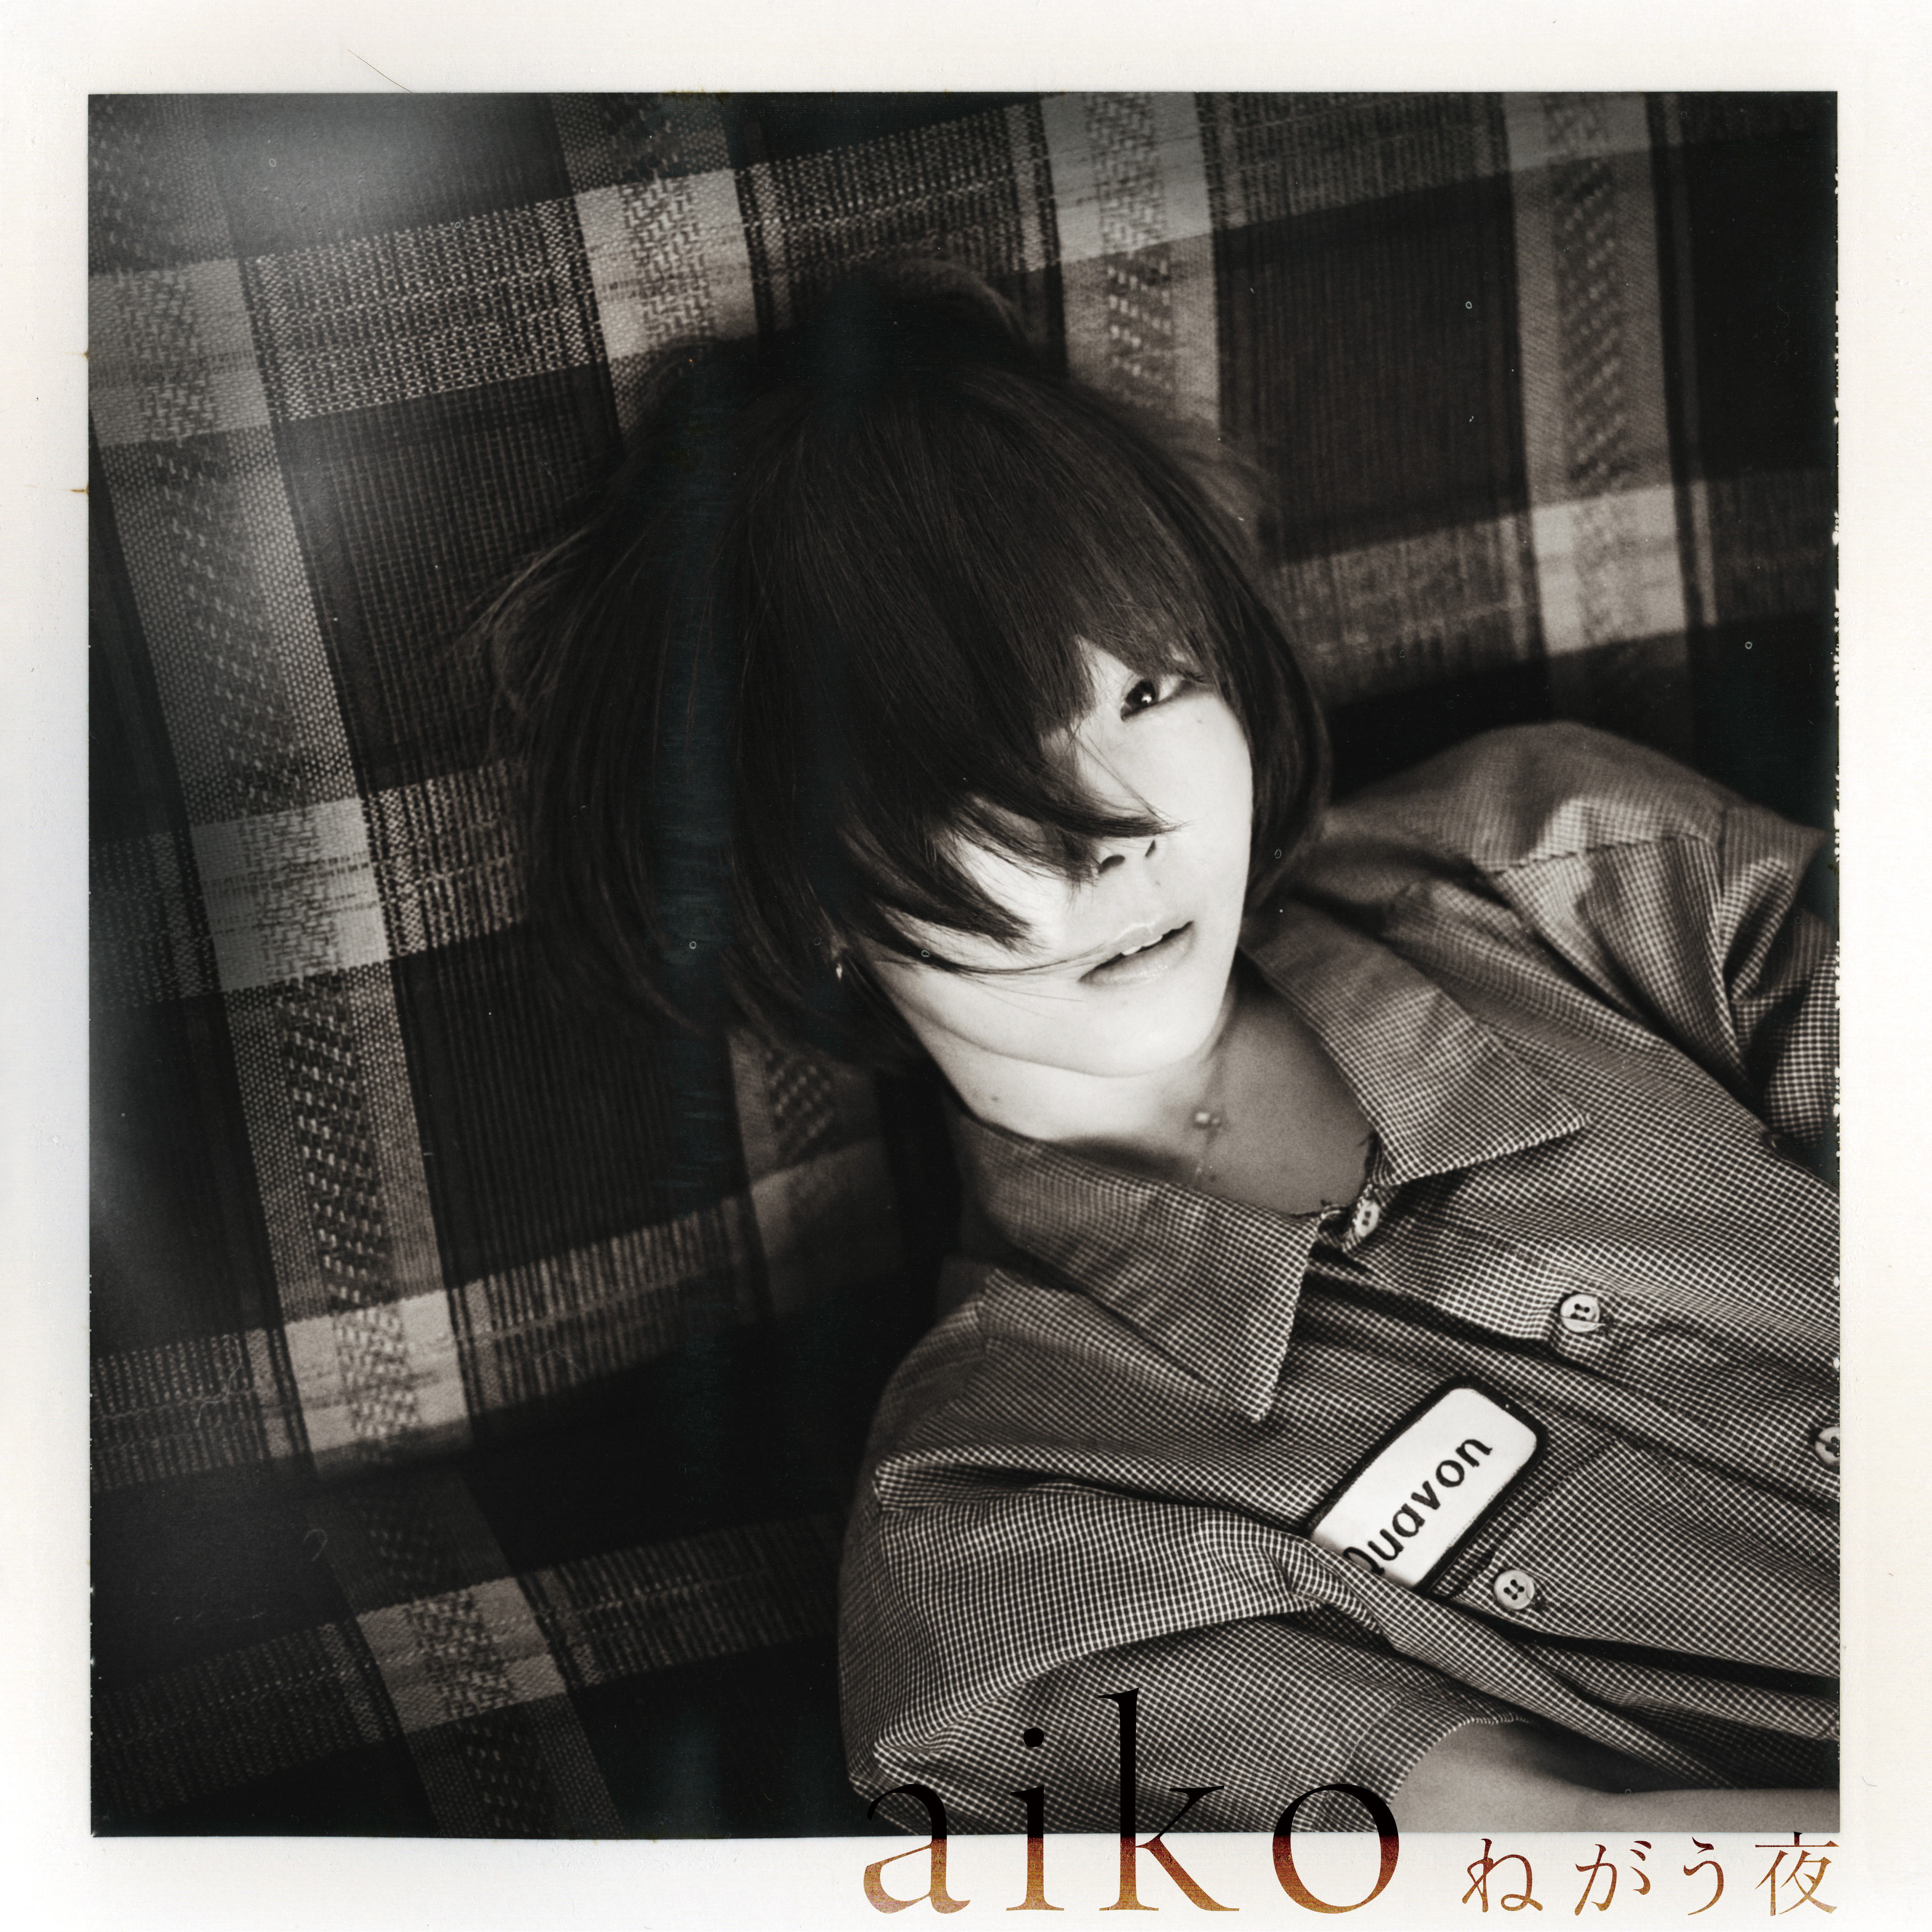 aiko "Negau Yoru" Limited Edition(CD+LIVE Blu-ray)Release on April 27th,2022